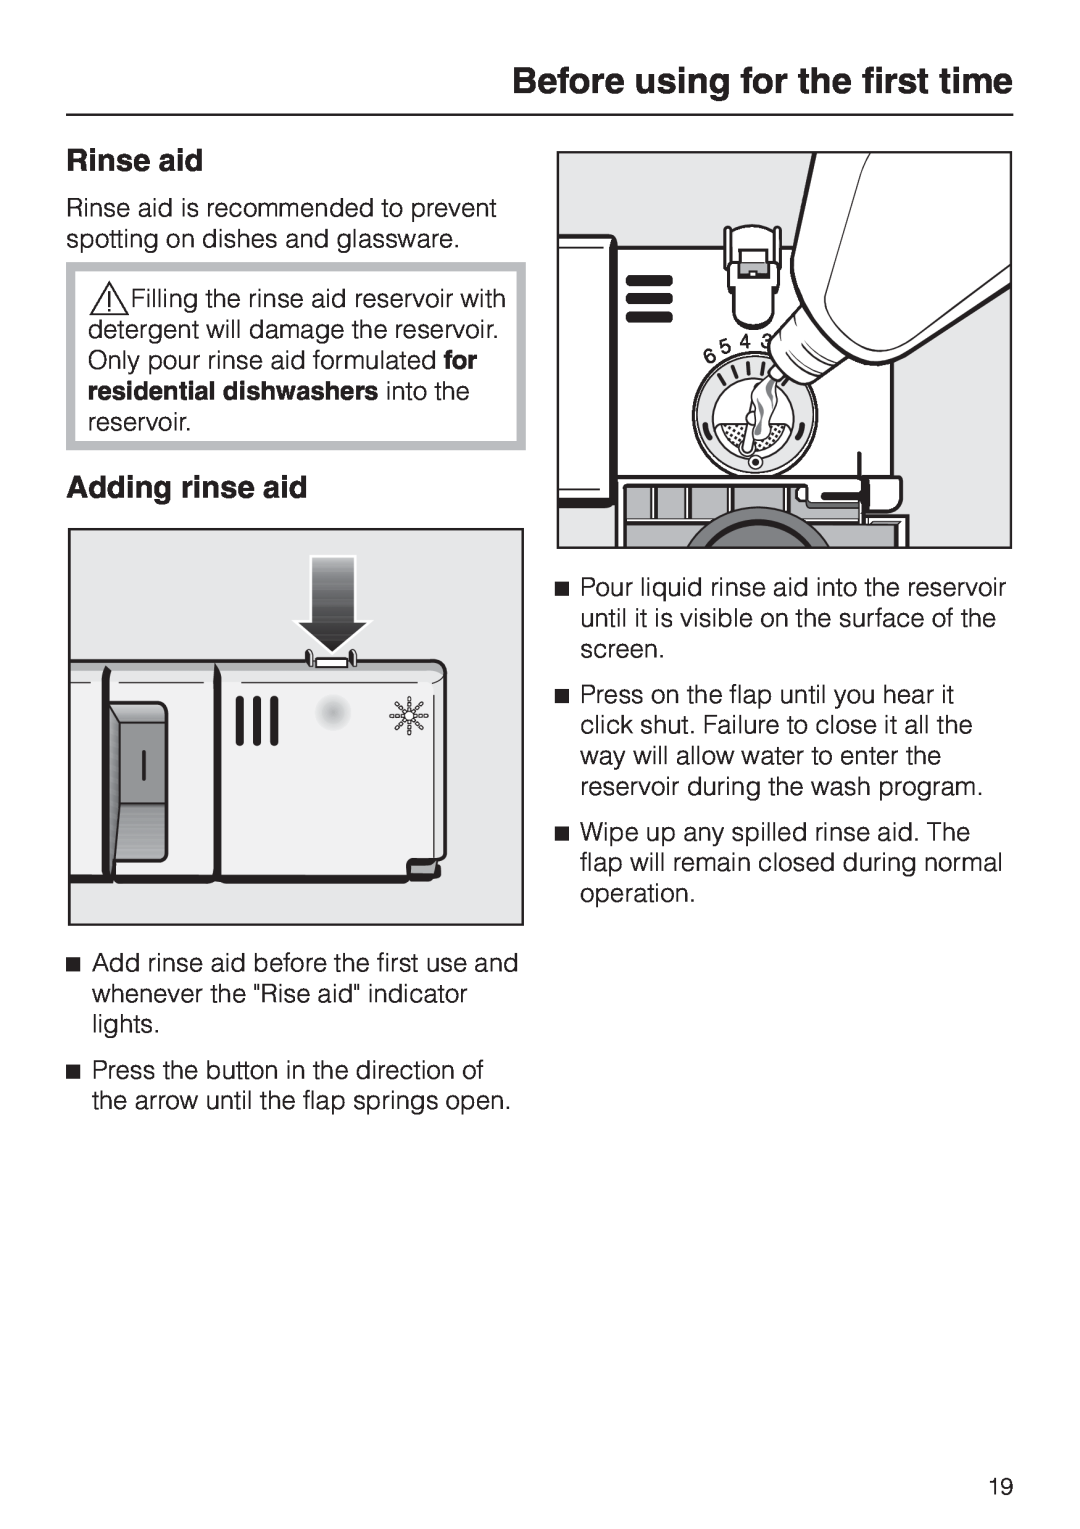 Miele G 658 SCVI, G 858 SCVI operating instructions Rinse aid, Adding rinse aid, Before using for the first time 